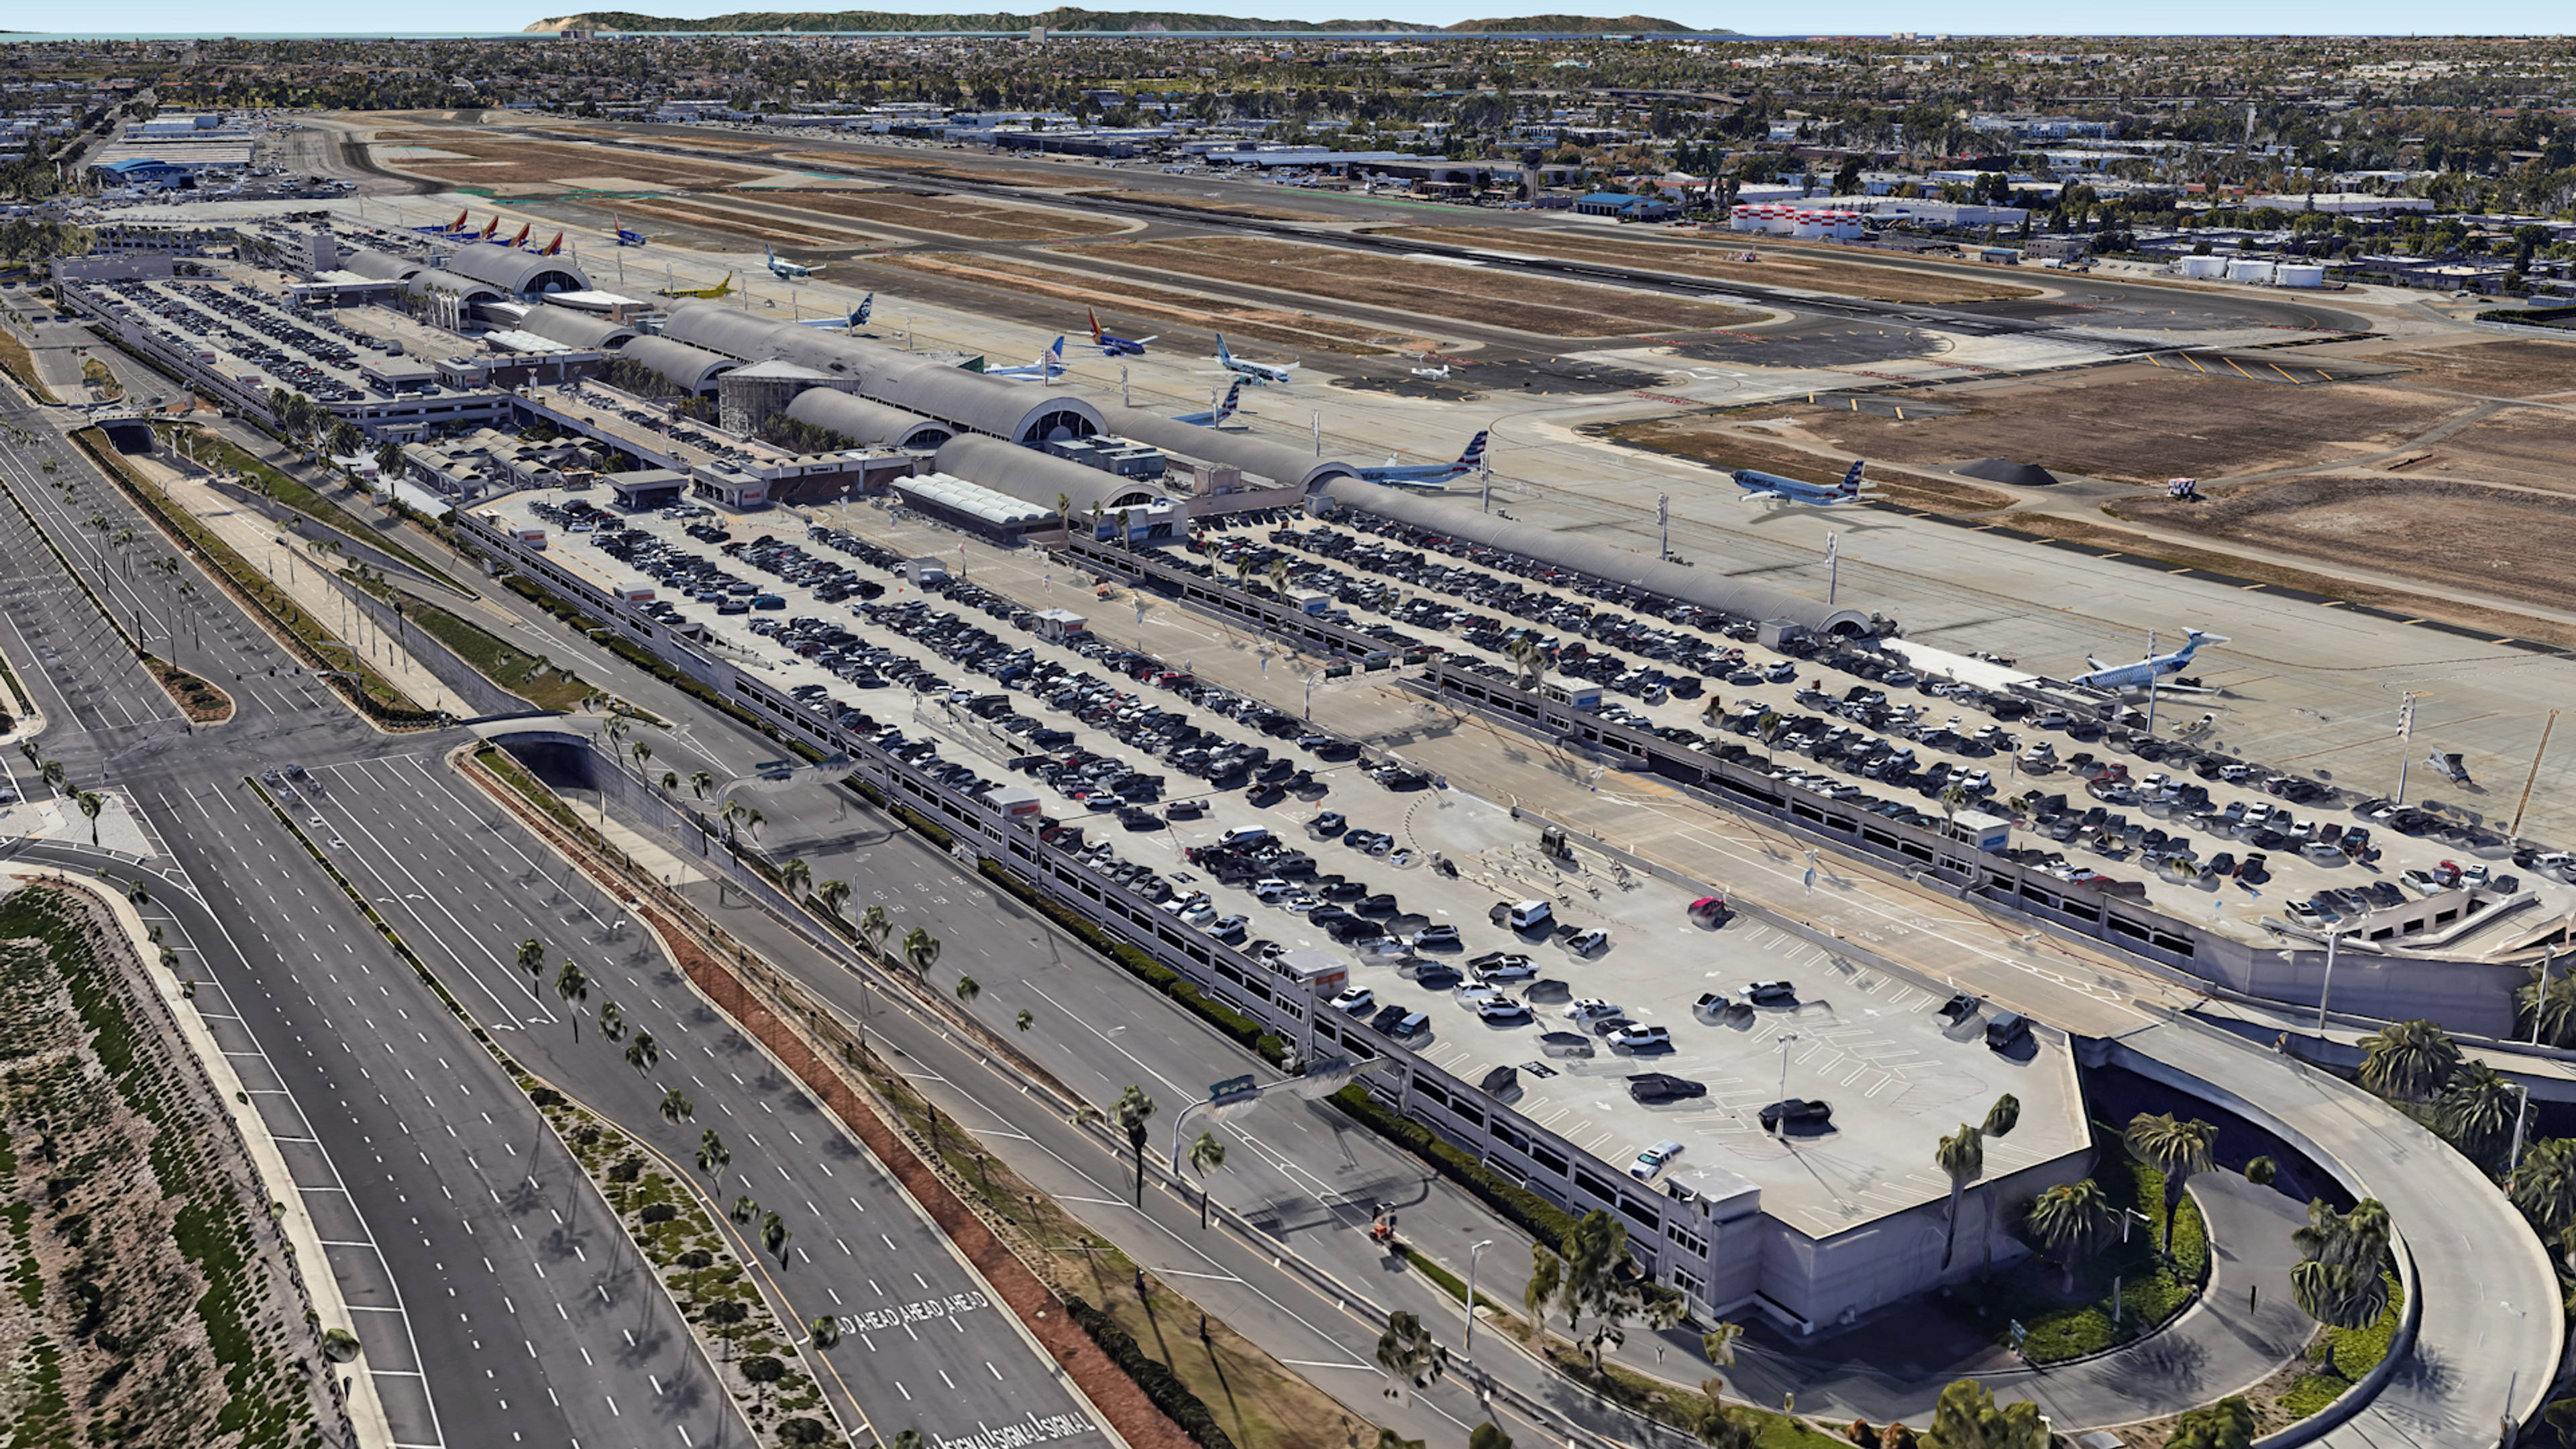  Aerial View of Orange County Airport Parking